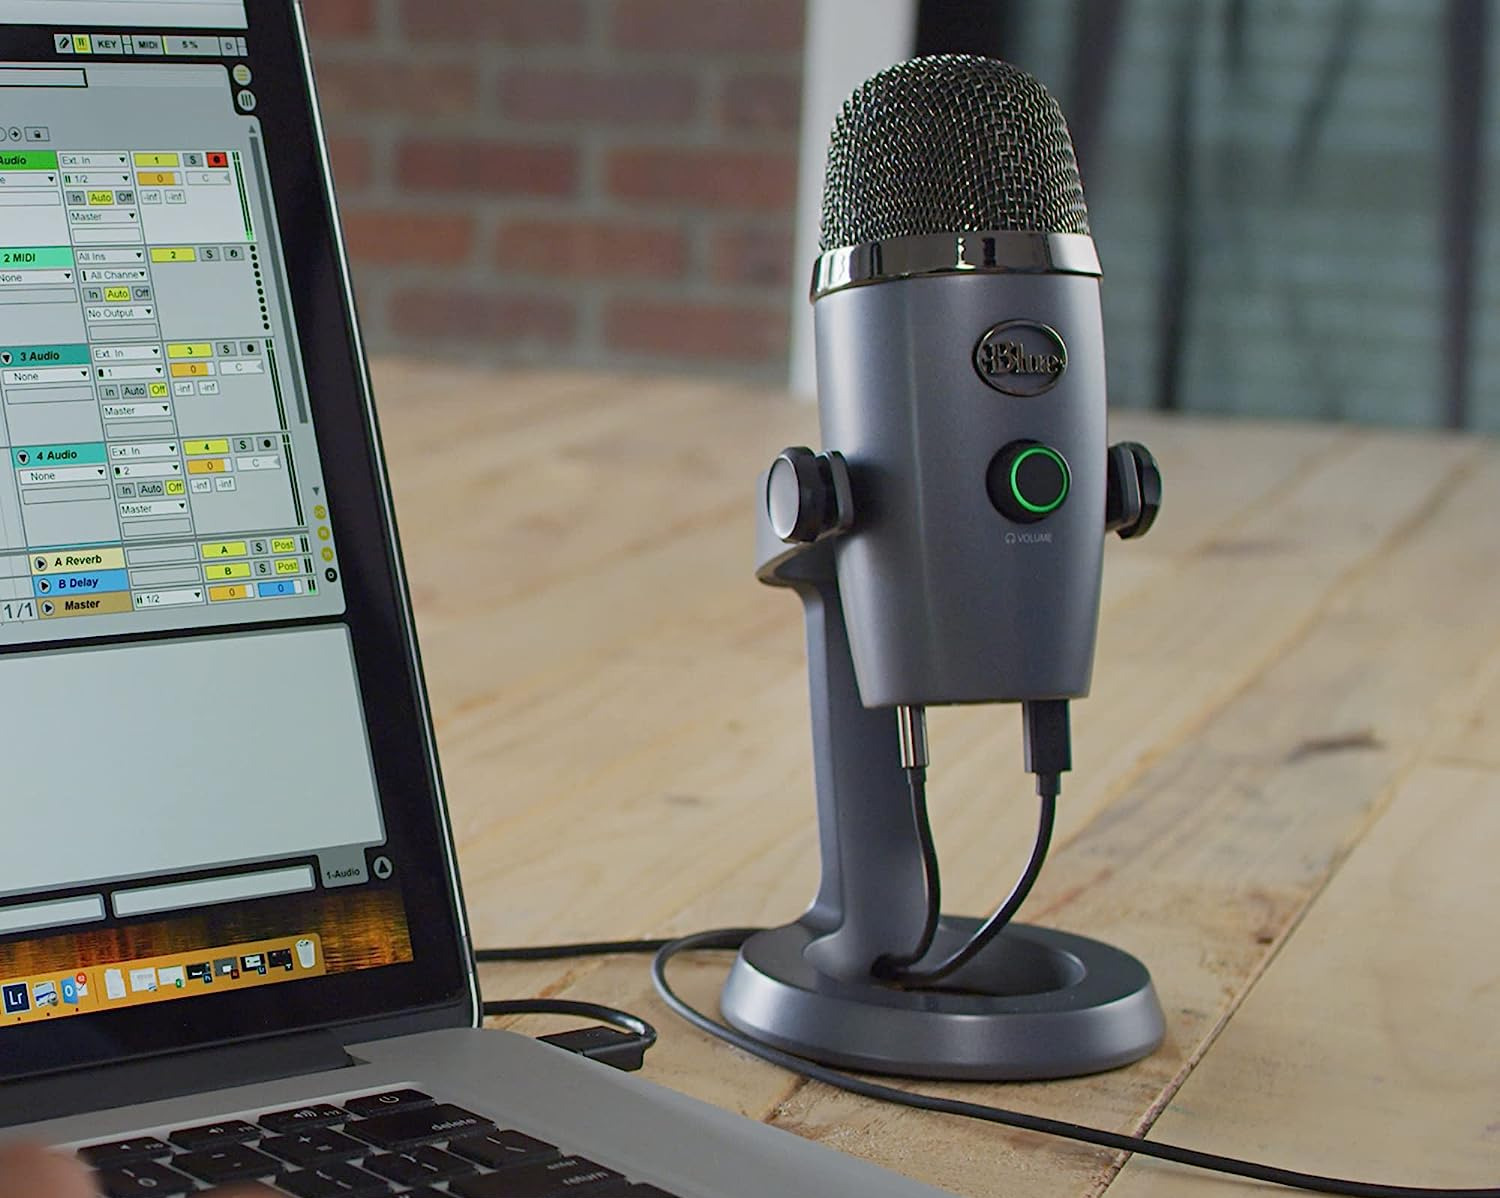 Sound clearer: This blue Yeti microphone is $20 off for Prime Day